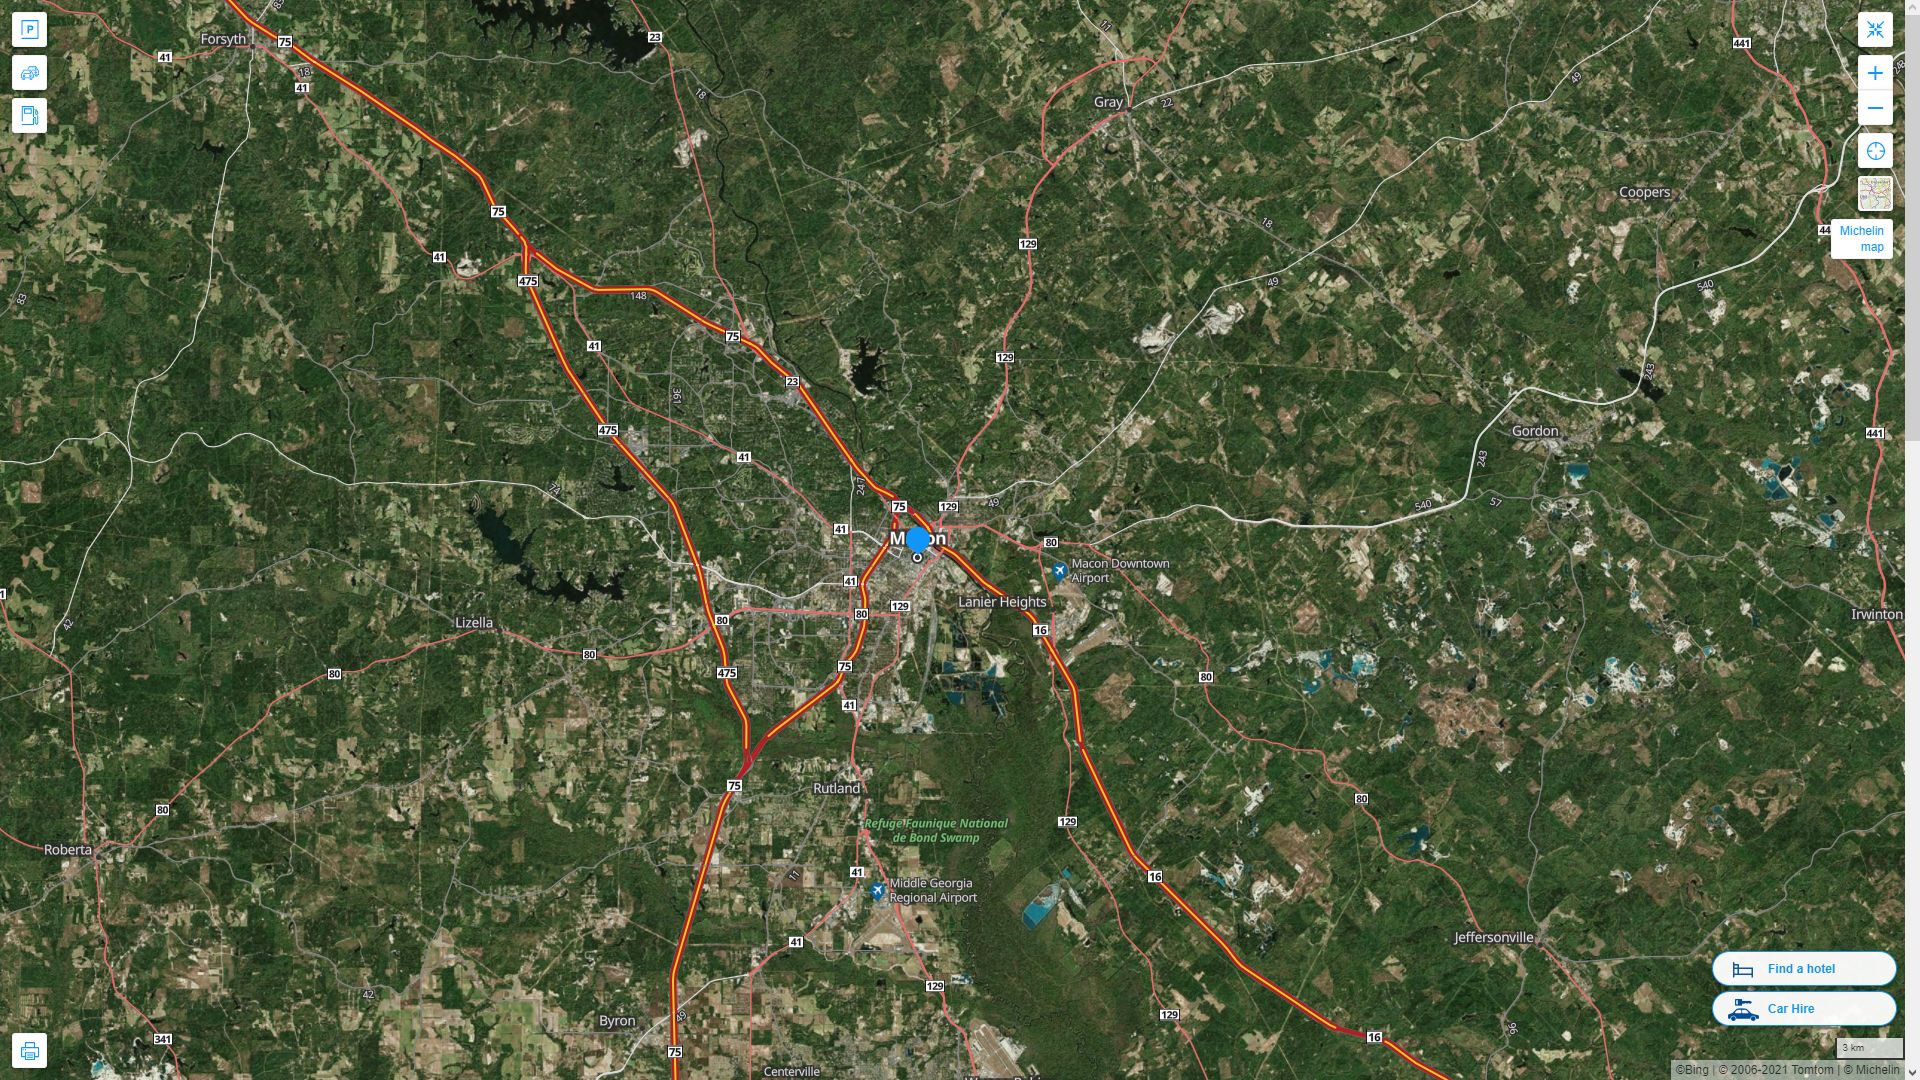 Macon Georgia Highway and Road Map with Satellite View